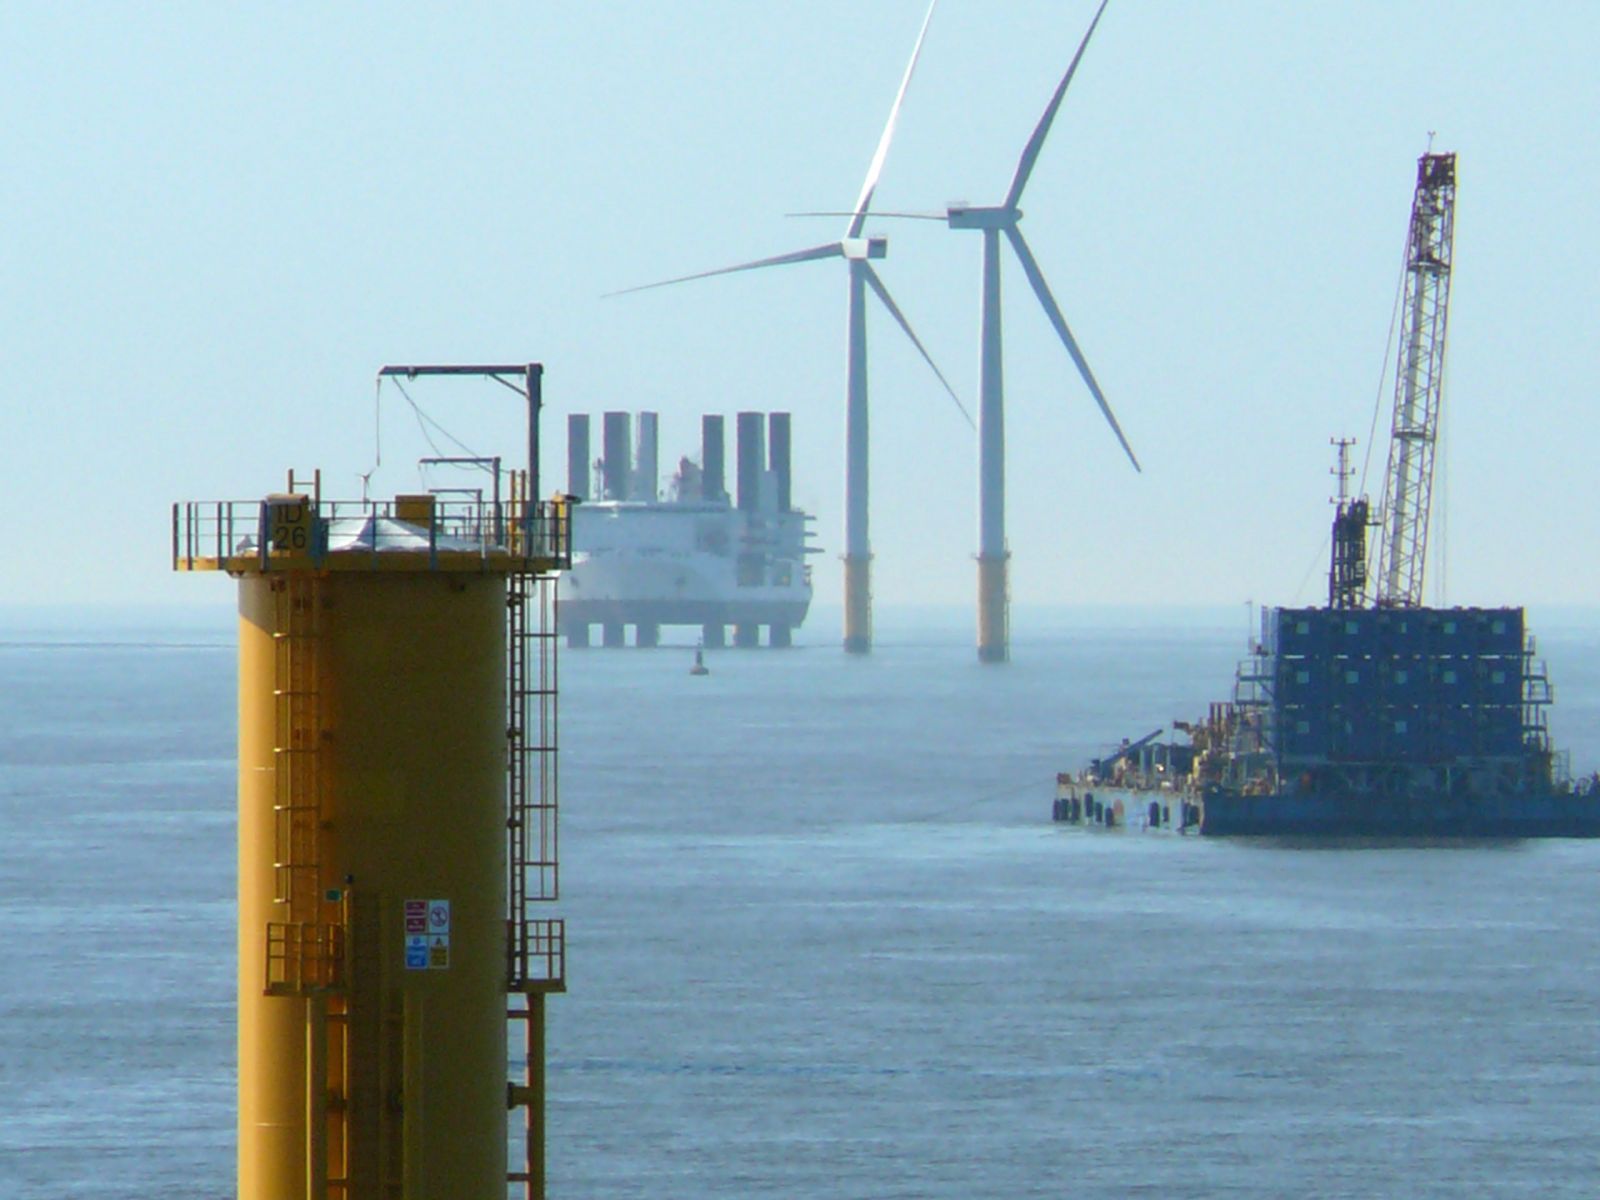 Centrica's Lynn and Inner Dowsing offshore wind farm off the UK's East Lincolnshire coast (www.centrica.com)